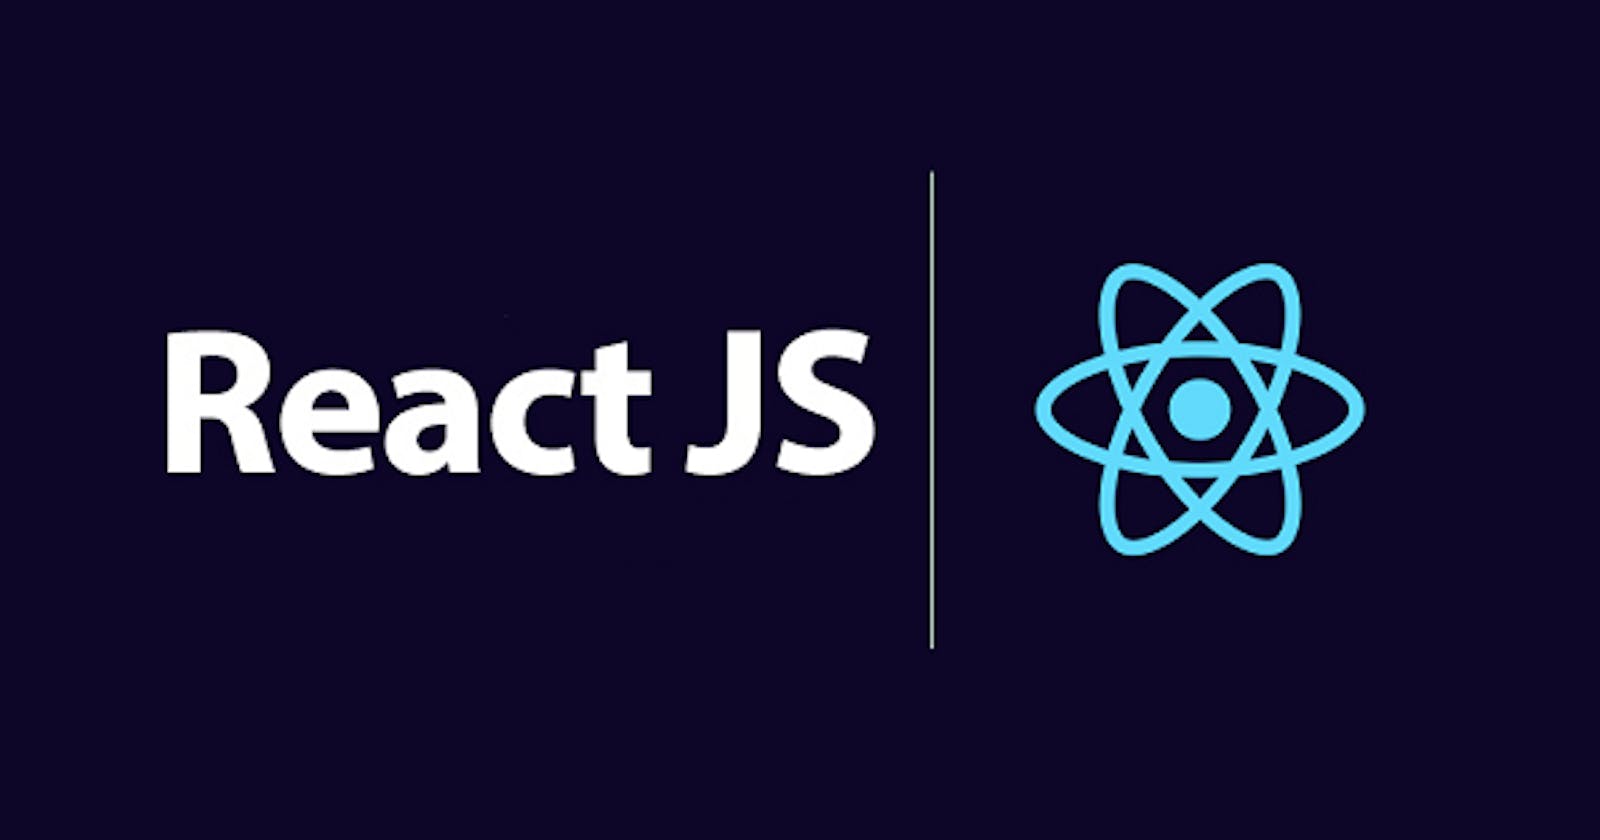 What is Reconciliation in React?